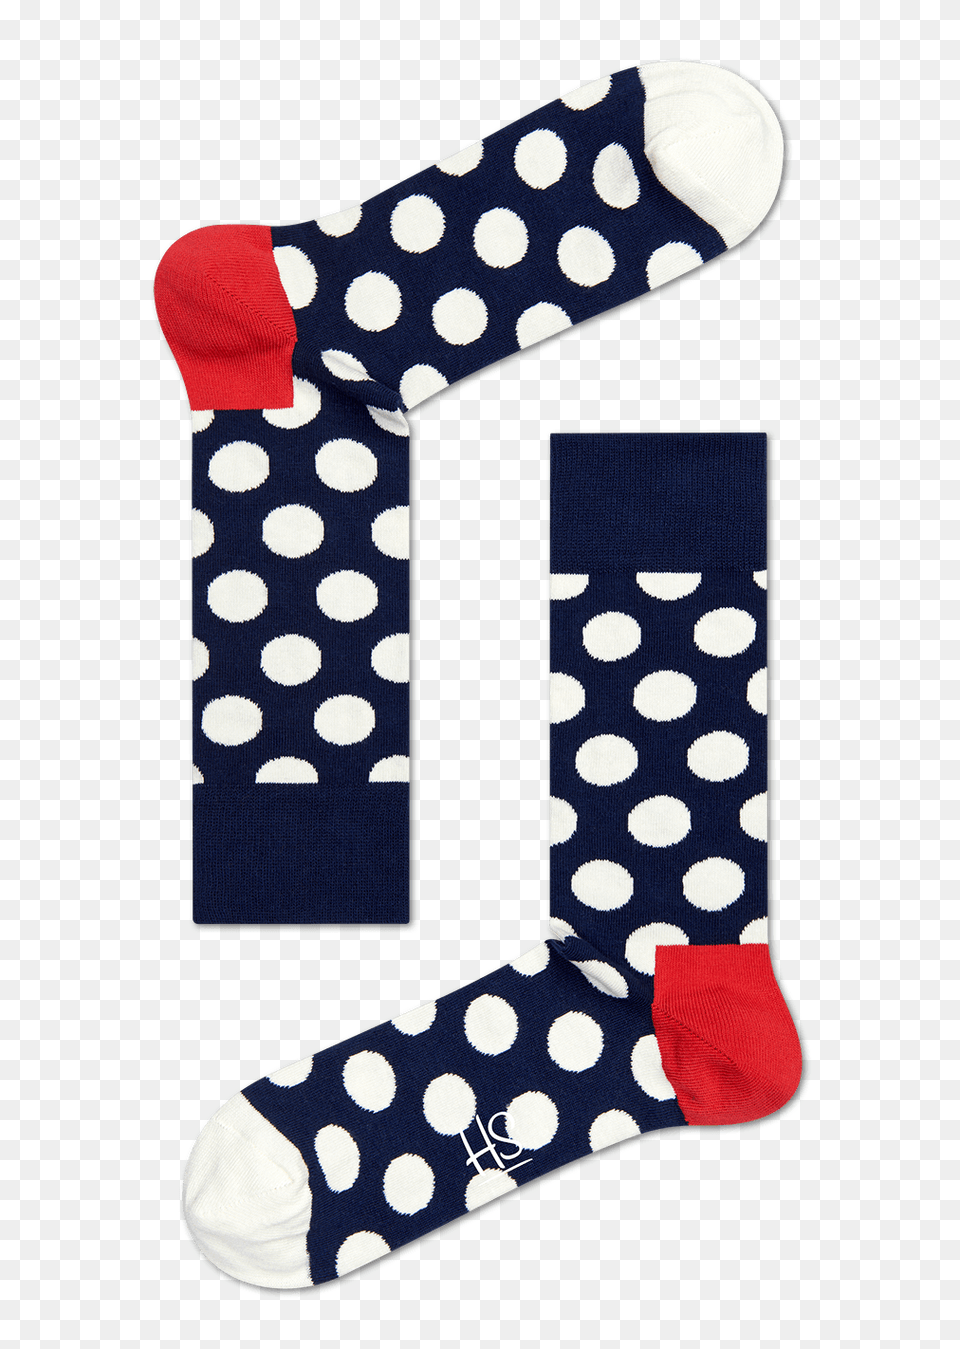 Bold And Colorful Polka Dot Socks Big Dots Underwear Hs Sweden, Pattern, Clothing, Hosiery, Christmas Free Transparent Png